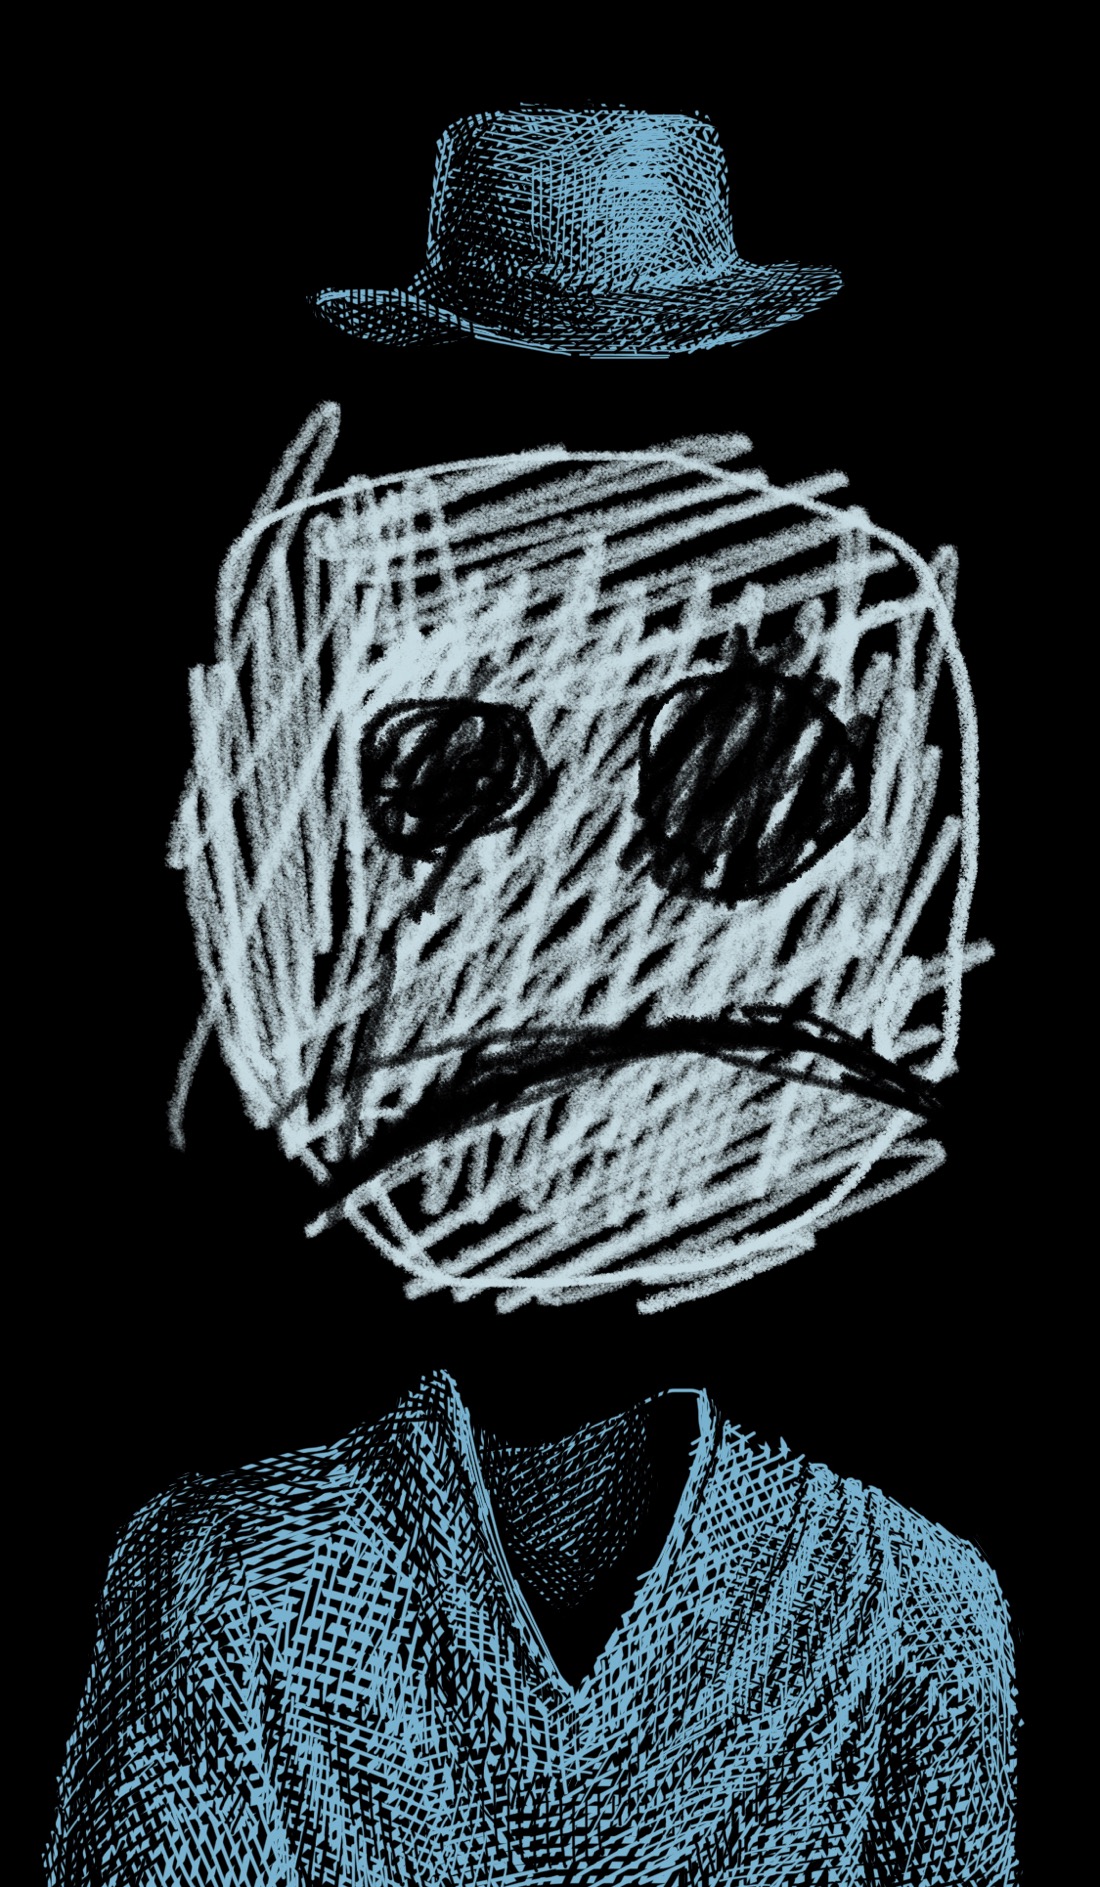 A crude white face on a black background. The face has two cavernous eyes, a frowning mouth, and no nose. It is roughly scribbled in crayon, as though drawn by a toddler. Above the face is a more carefully drawn wide-brimmed hat, floating in space. Below the face is a shirt, also more realistically drawn. The shirt is upright, as though someone is standing in it, but empty, as though the person is invisible. The overall effect is that of an invisible figure wearing a hat, a shirt, and a disproportionately large, misshapen face drawn by an upset child.